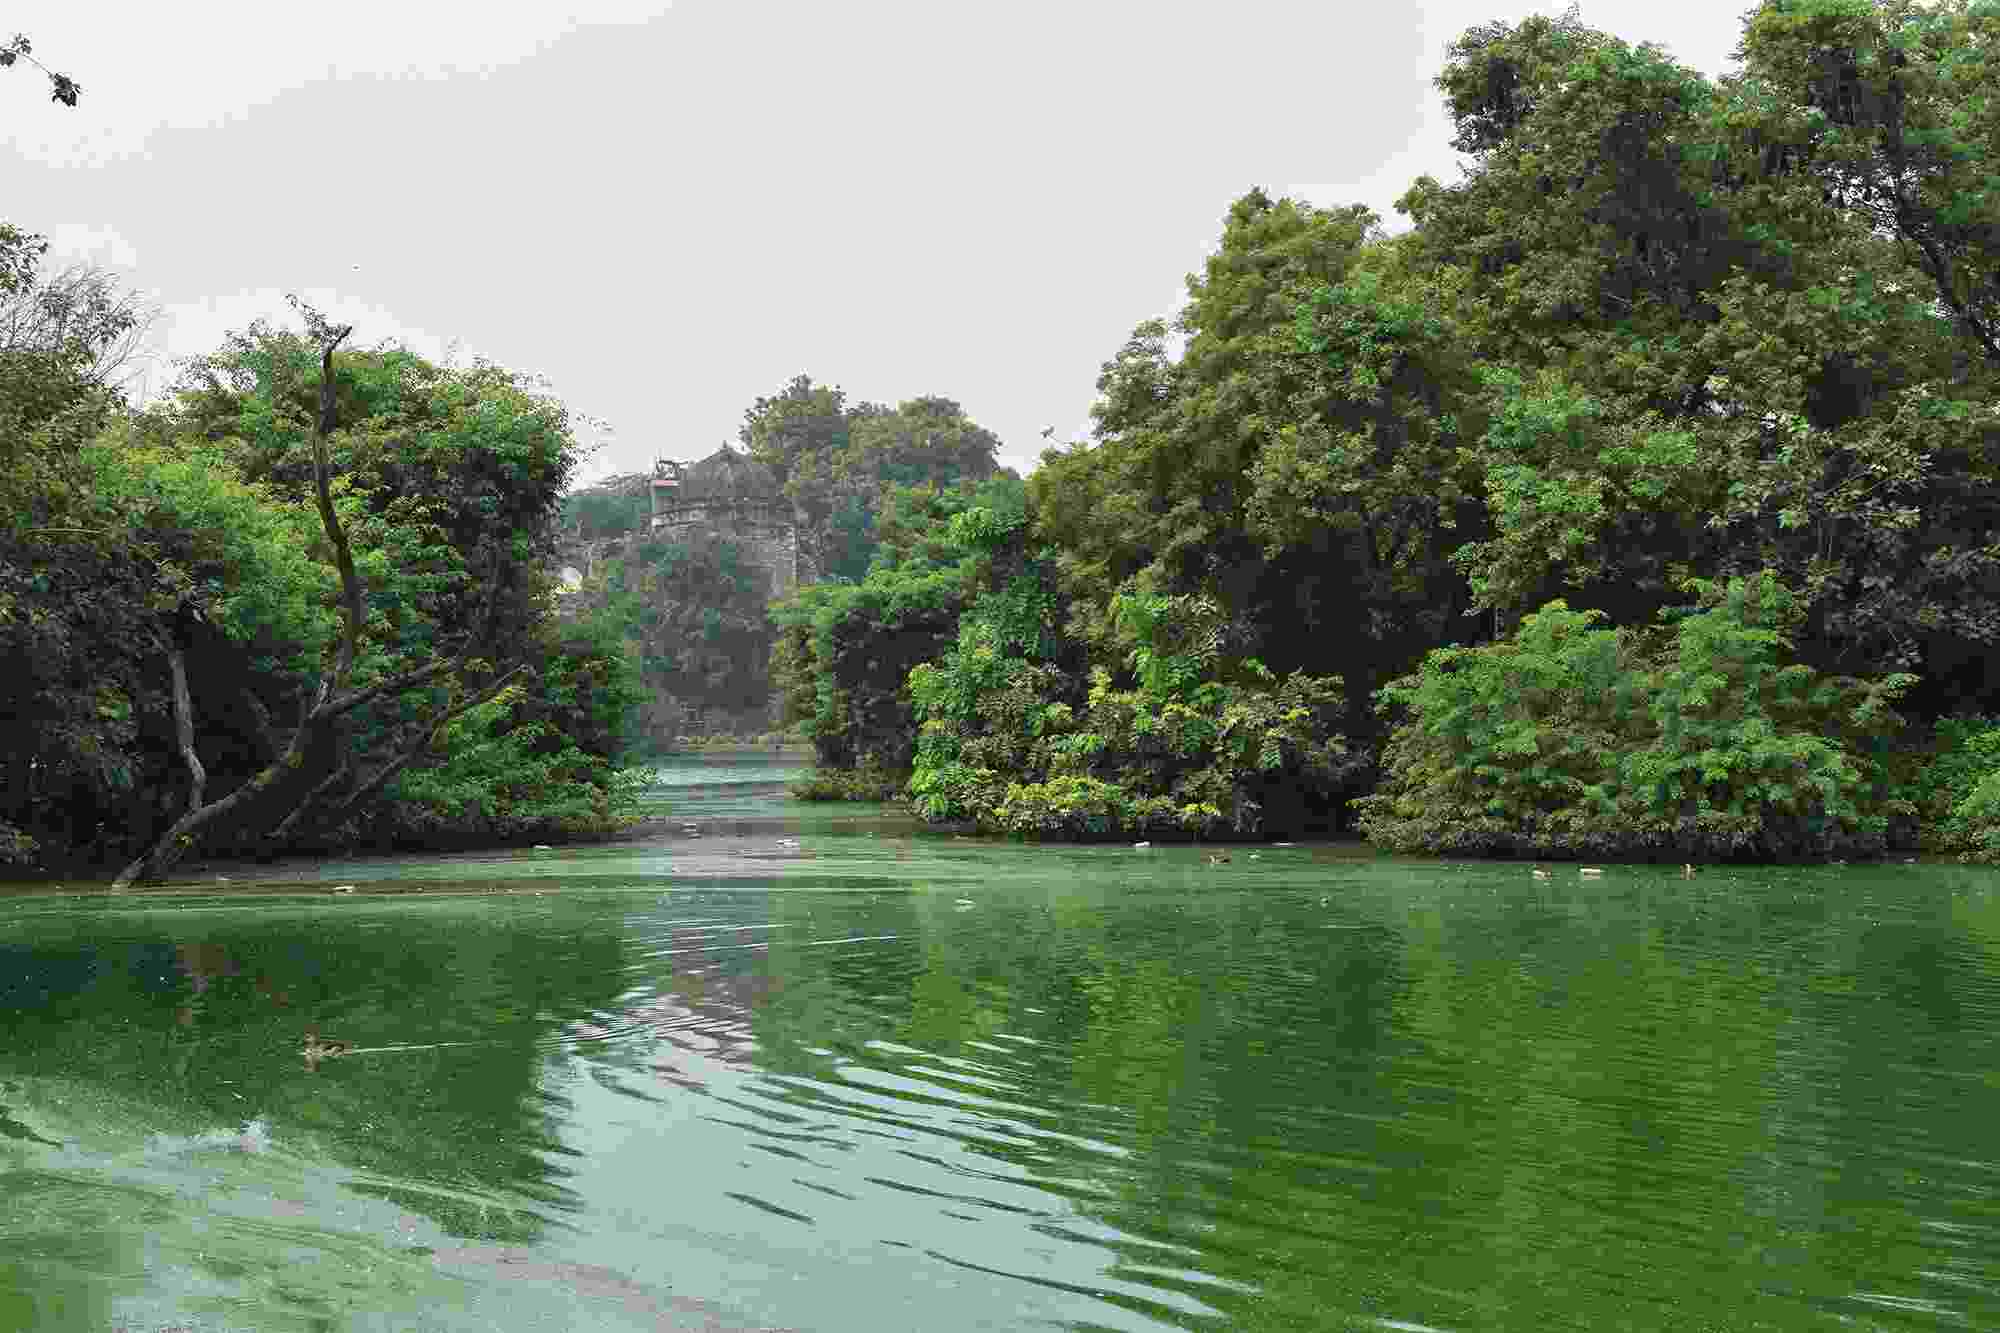 Image shows the green waters of the Hauz Khas Lake, with green trees on either side